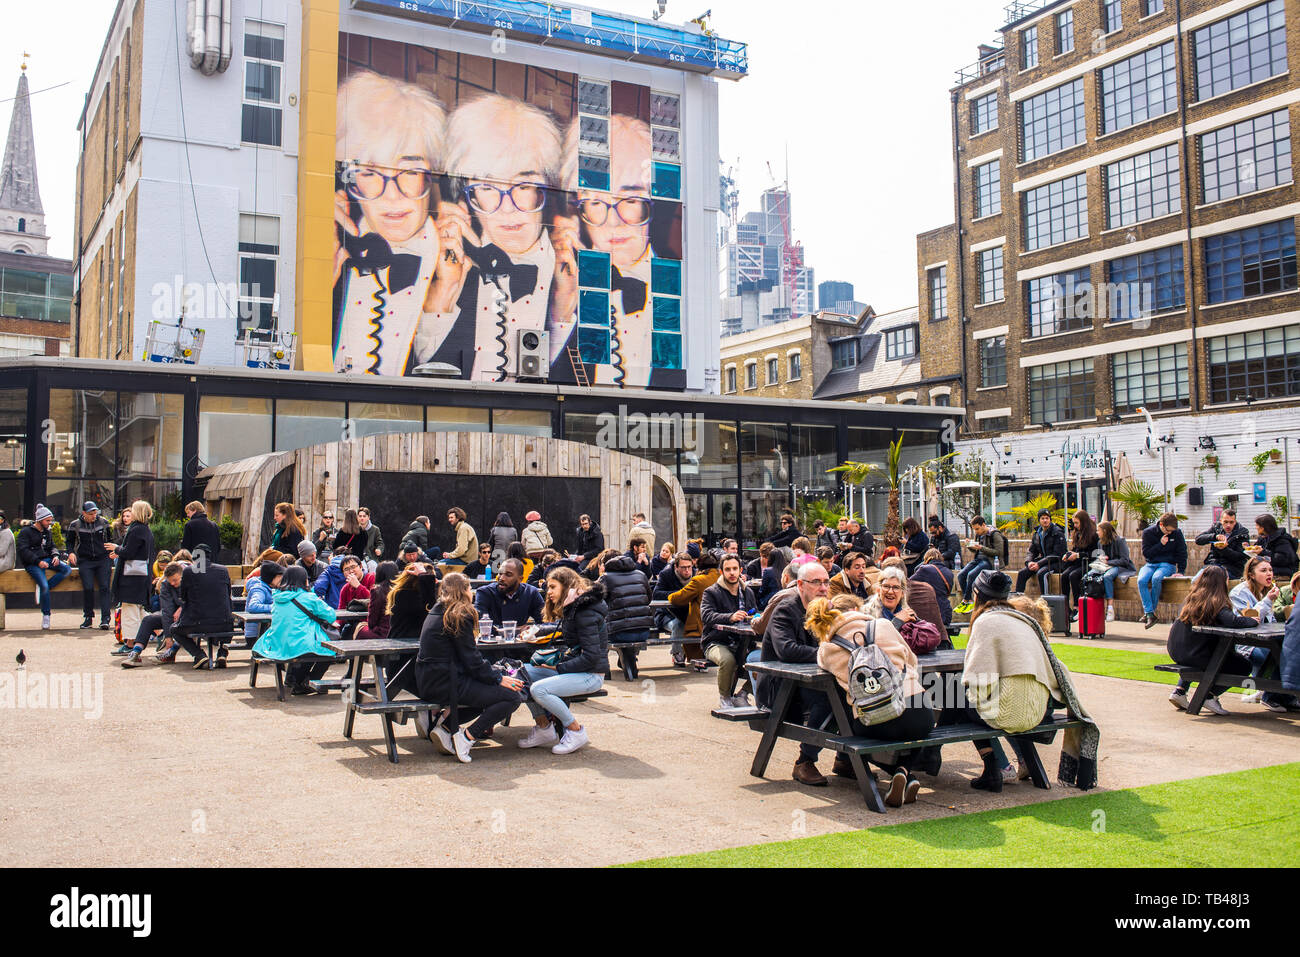 Pop up Outdoor food area with people eating outiside and mural street art celebrating Andy Warhol at The Old Truman Brewery, Ely's Yard, Shoreditch Stock Photo